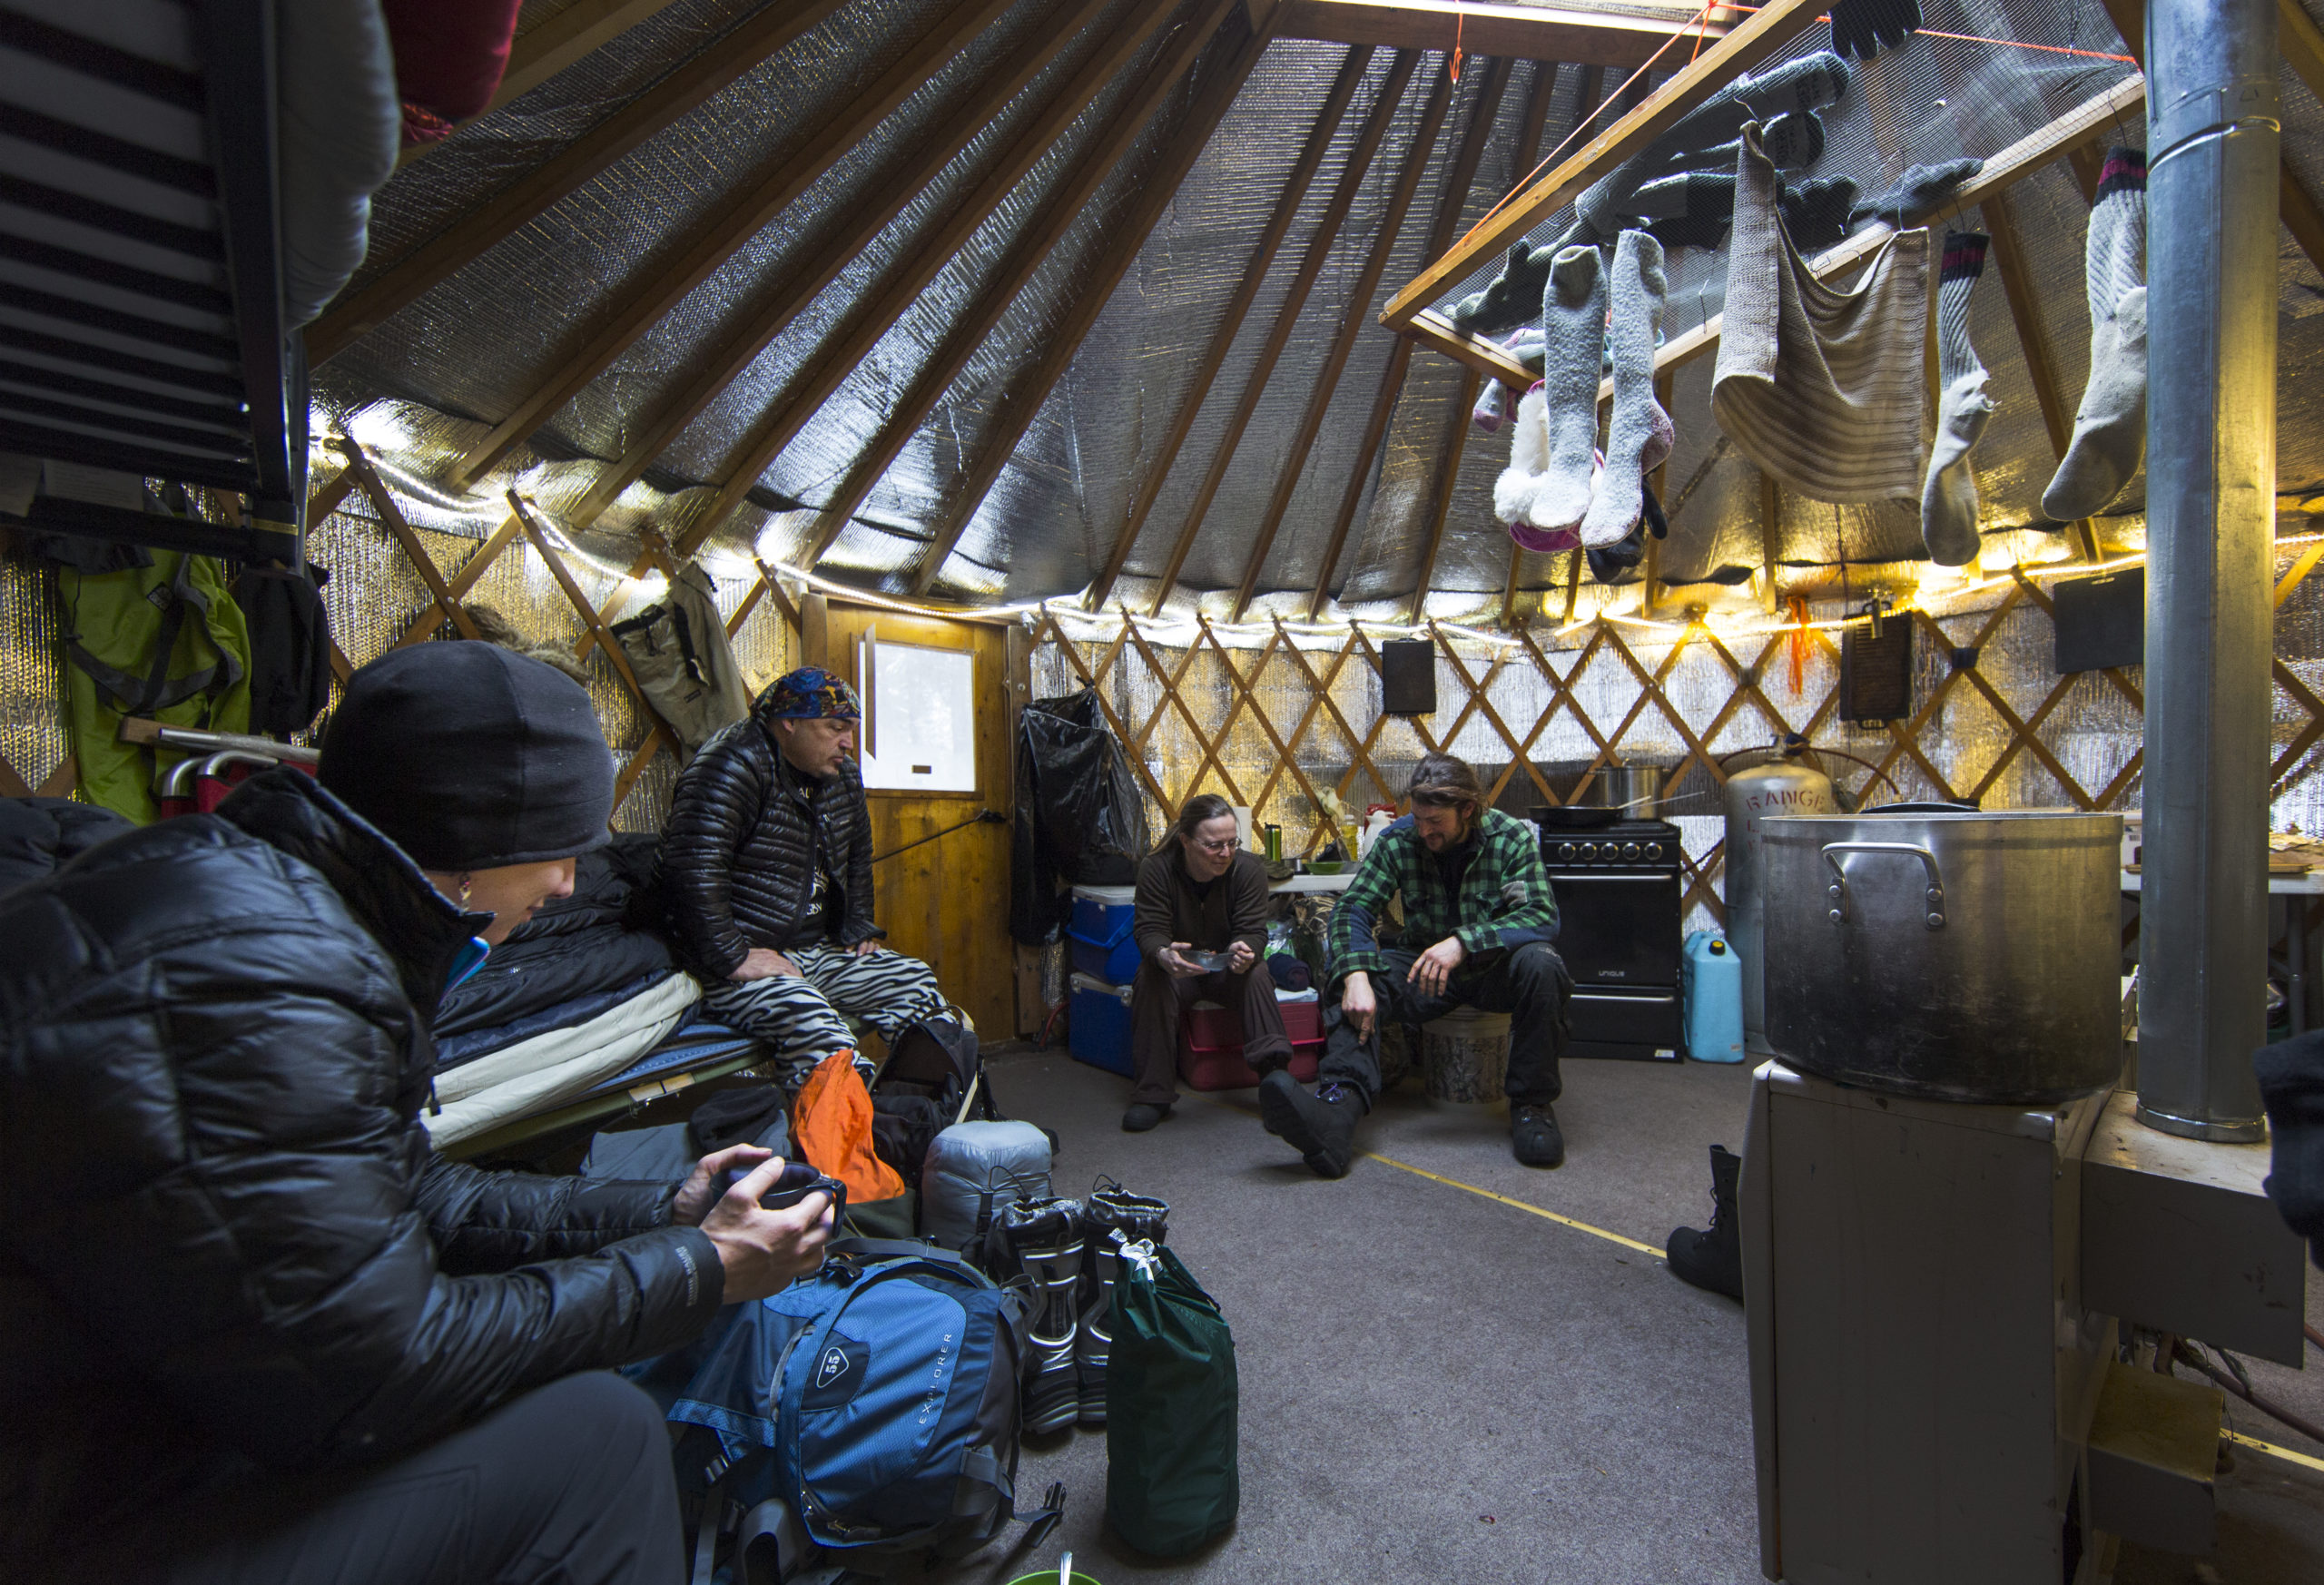 White Wilderness Riders resting in a yurt with gear and clothes drying